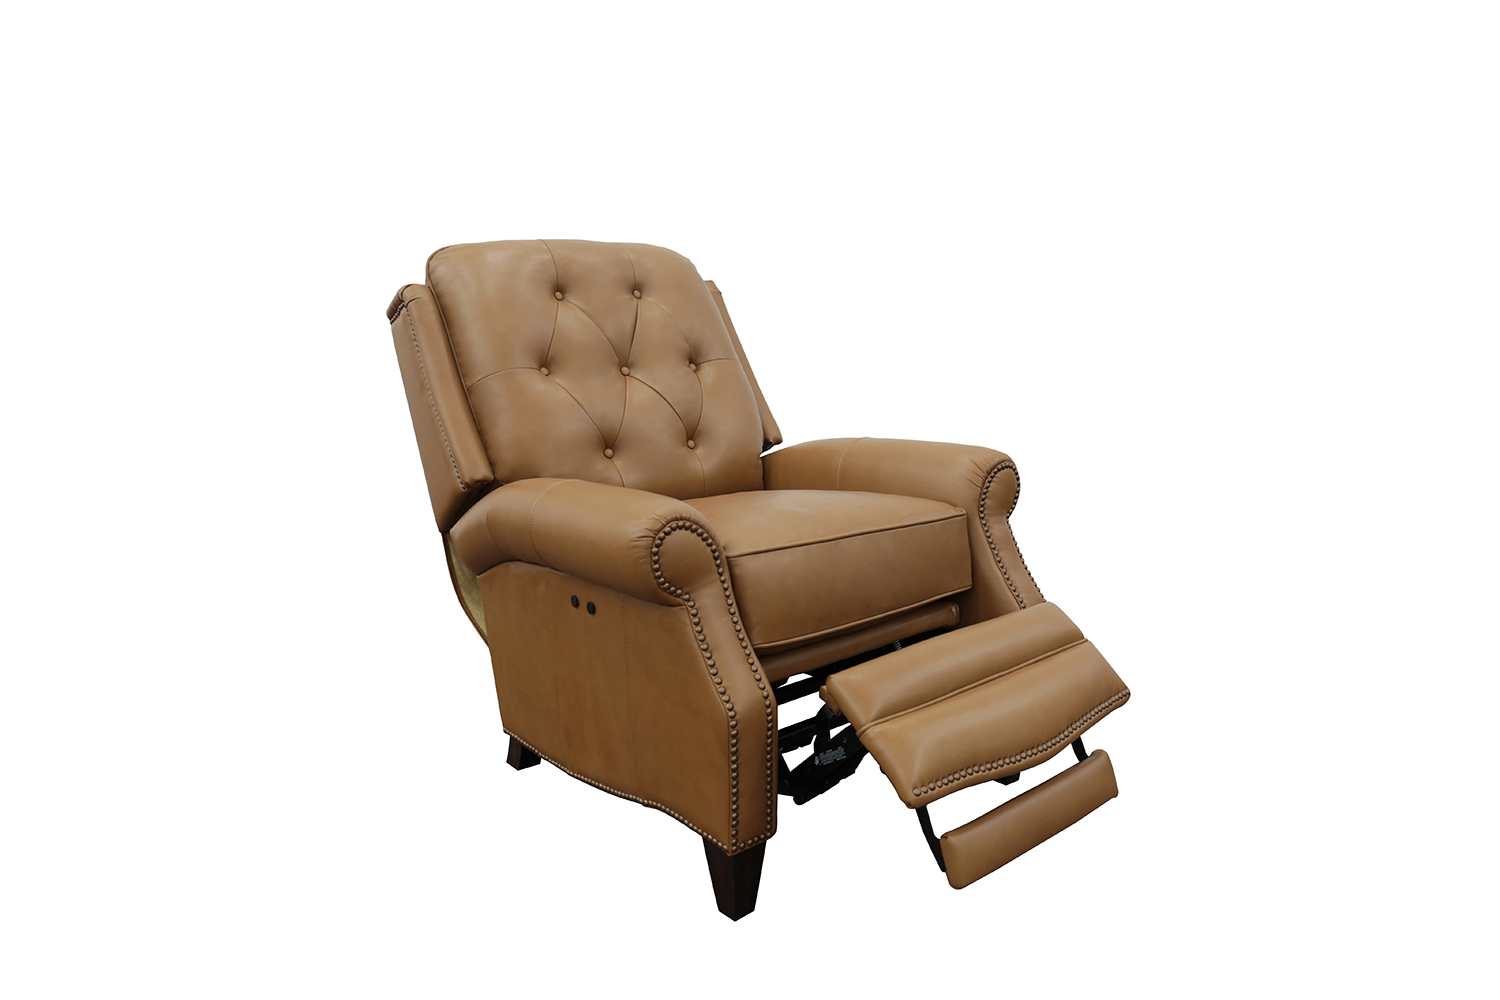 Barcalounger Ava Power Recliner Chair - Shoreham Ponytail/All Leather